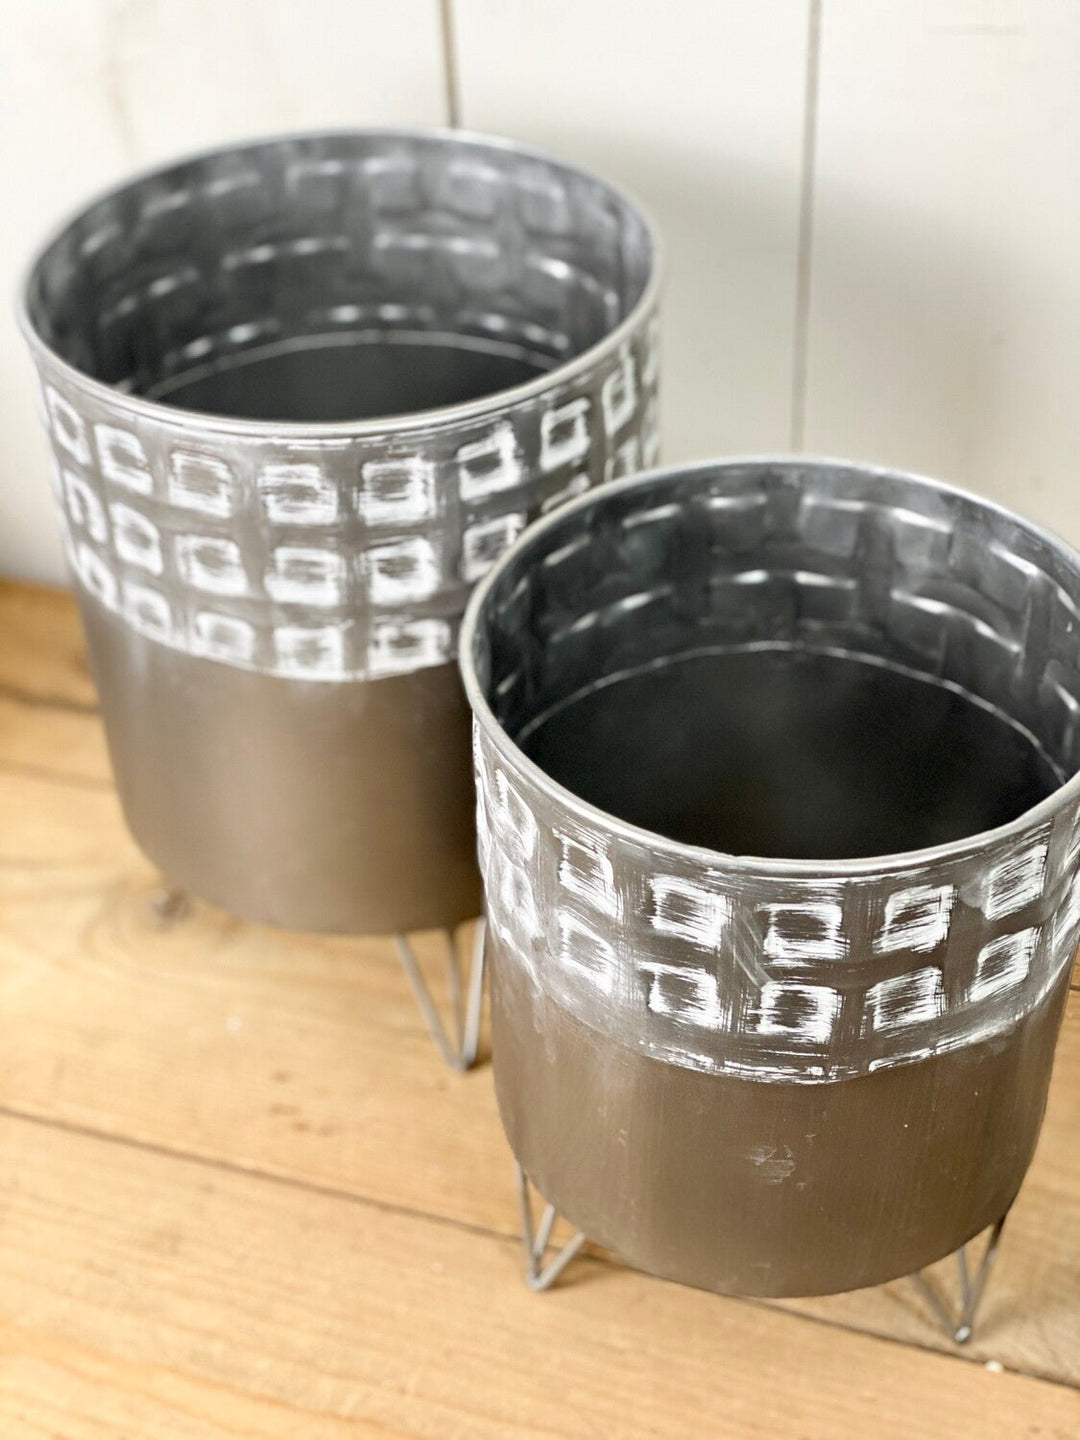 Metal Patterned Planters